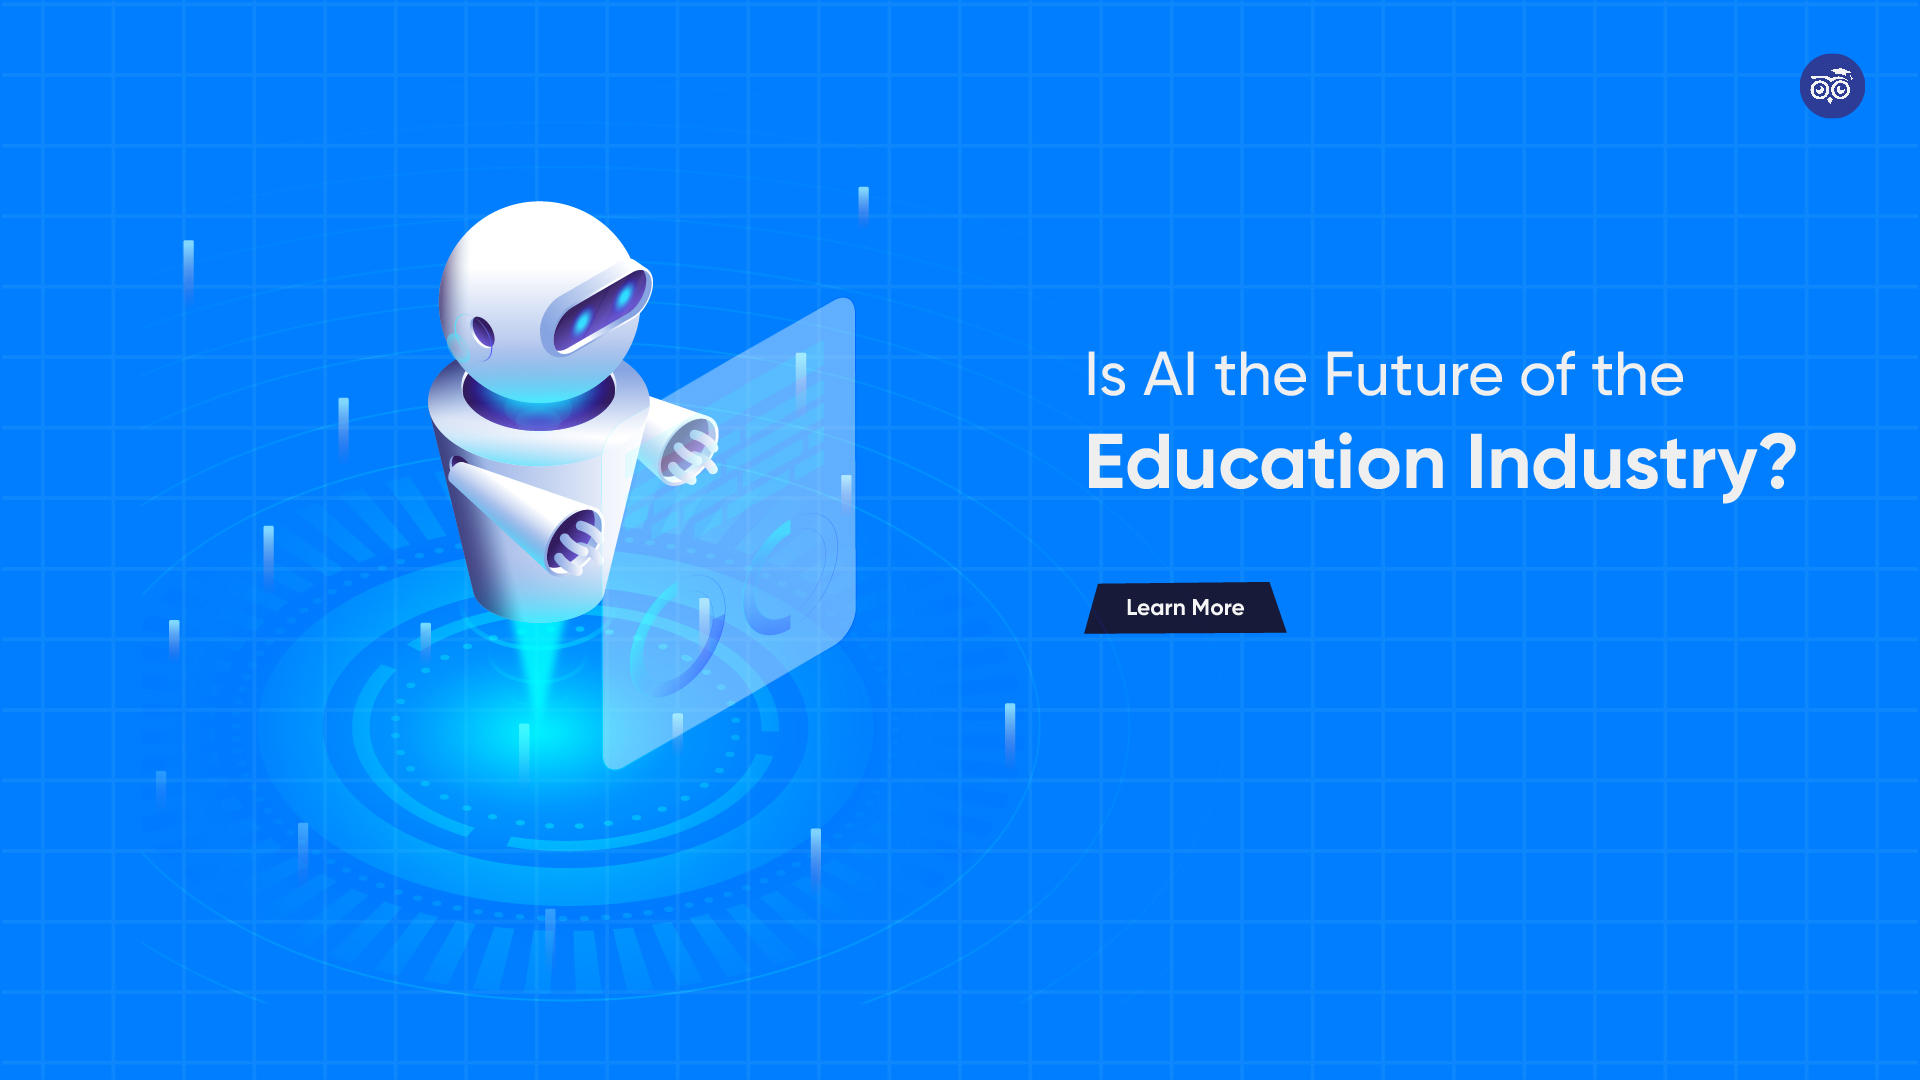 Role of AI in the Future of the Education Industry